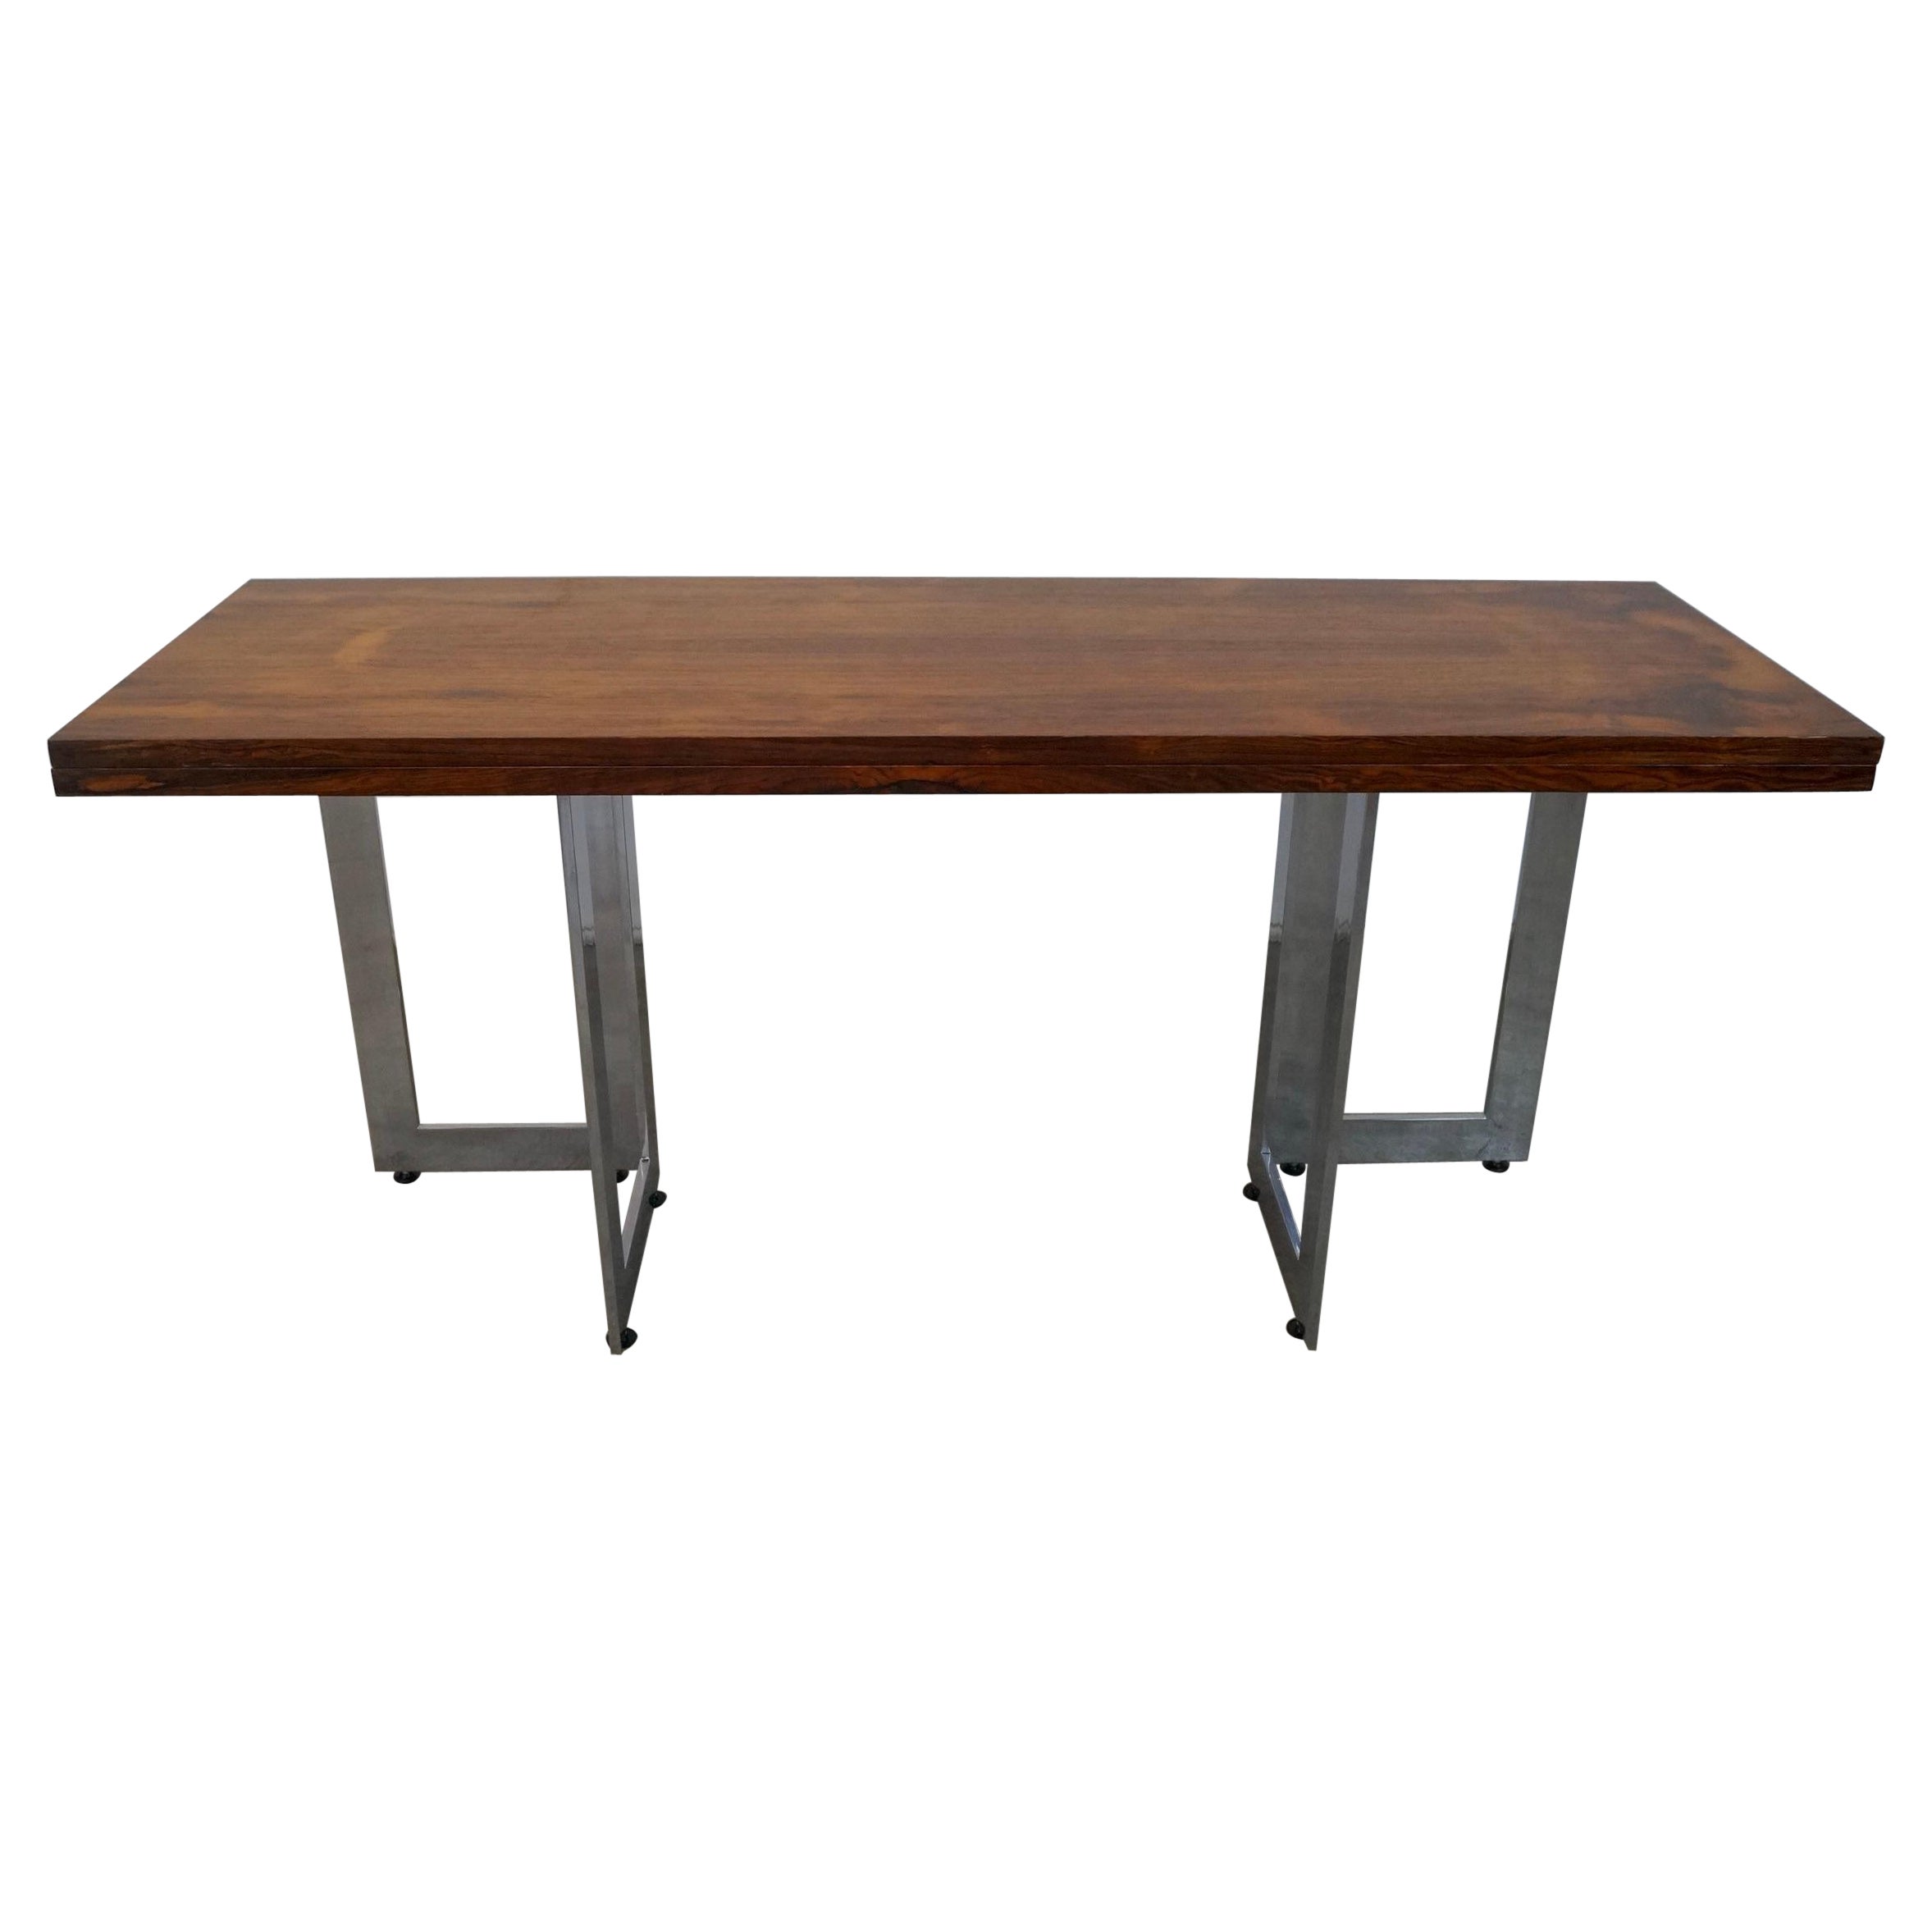 1970's Danish Modern Rosewood & Chrome Folding Dining Table / Console Table For Sale